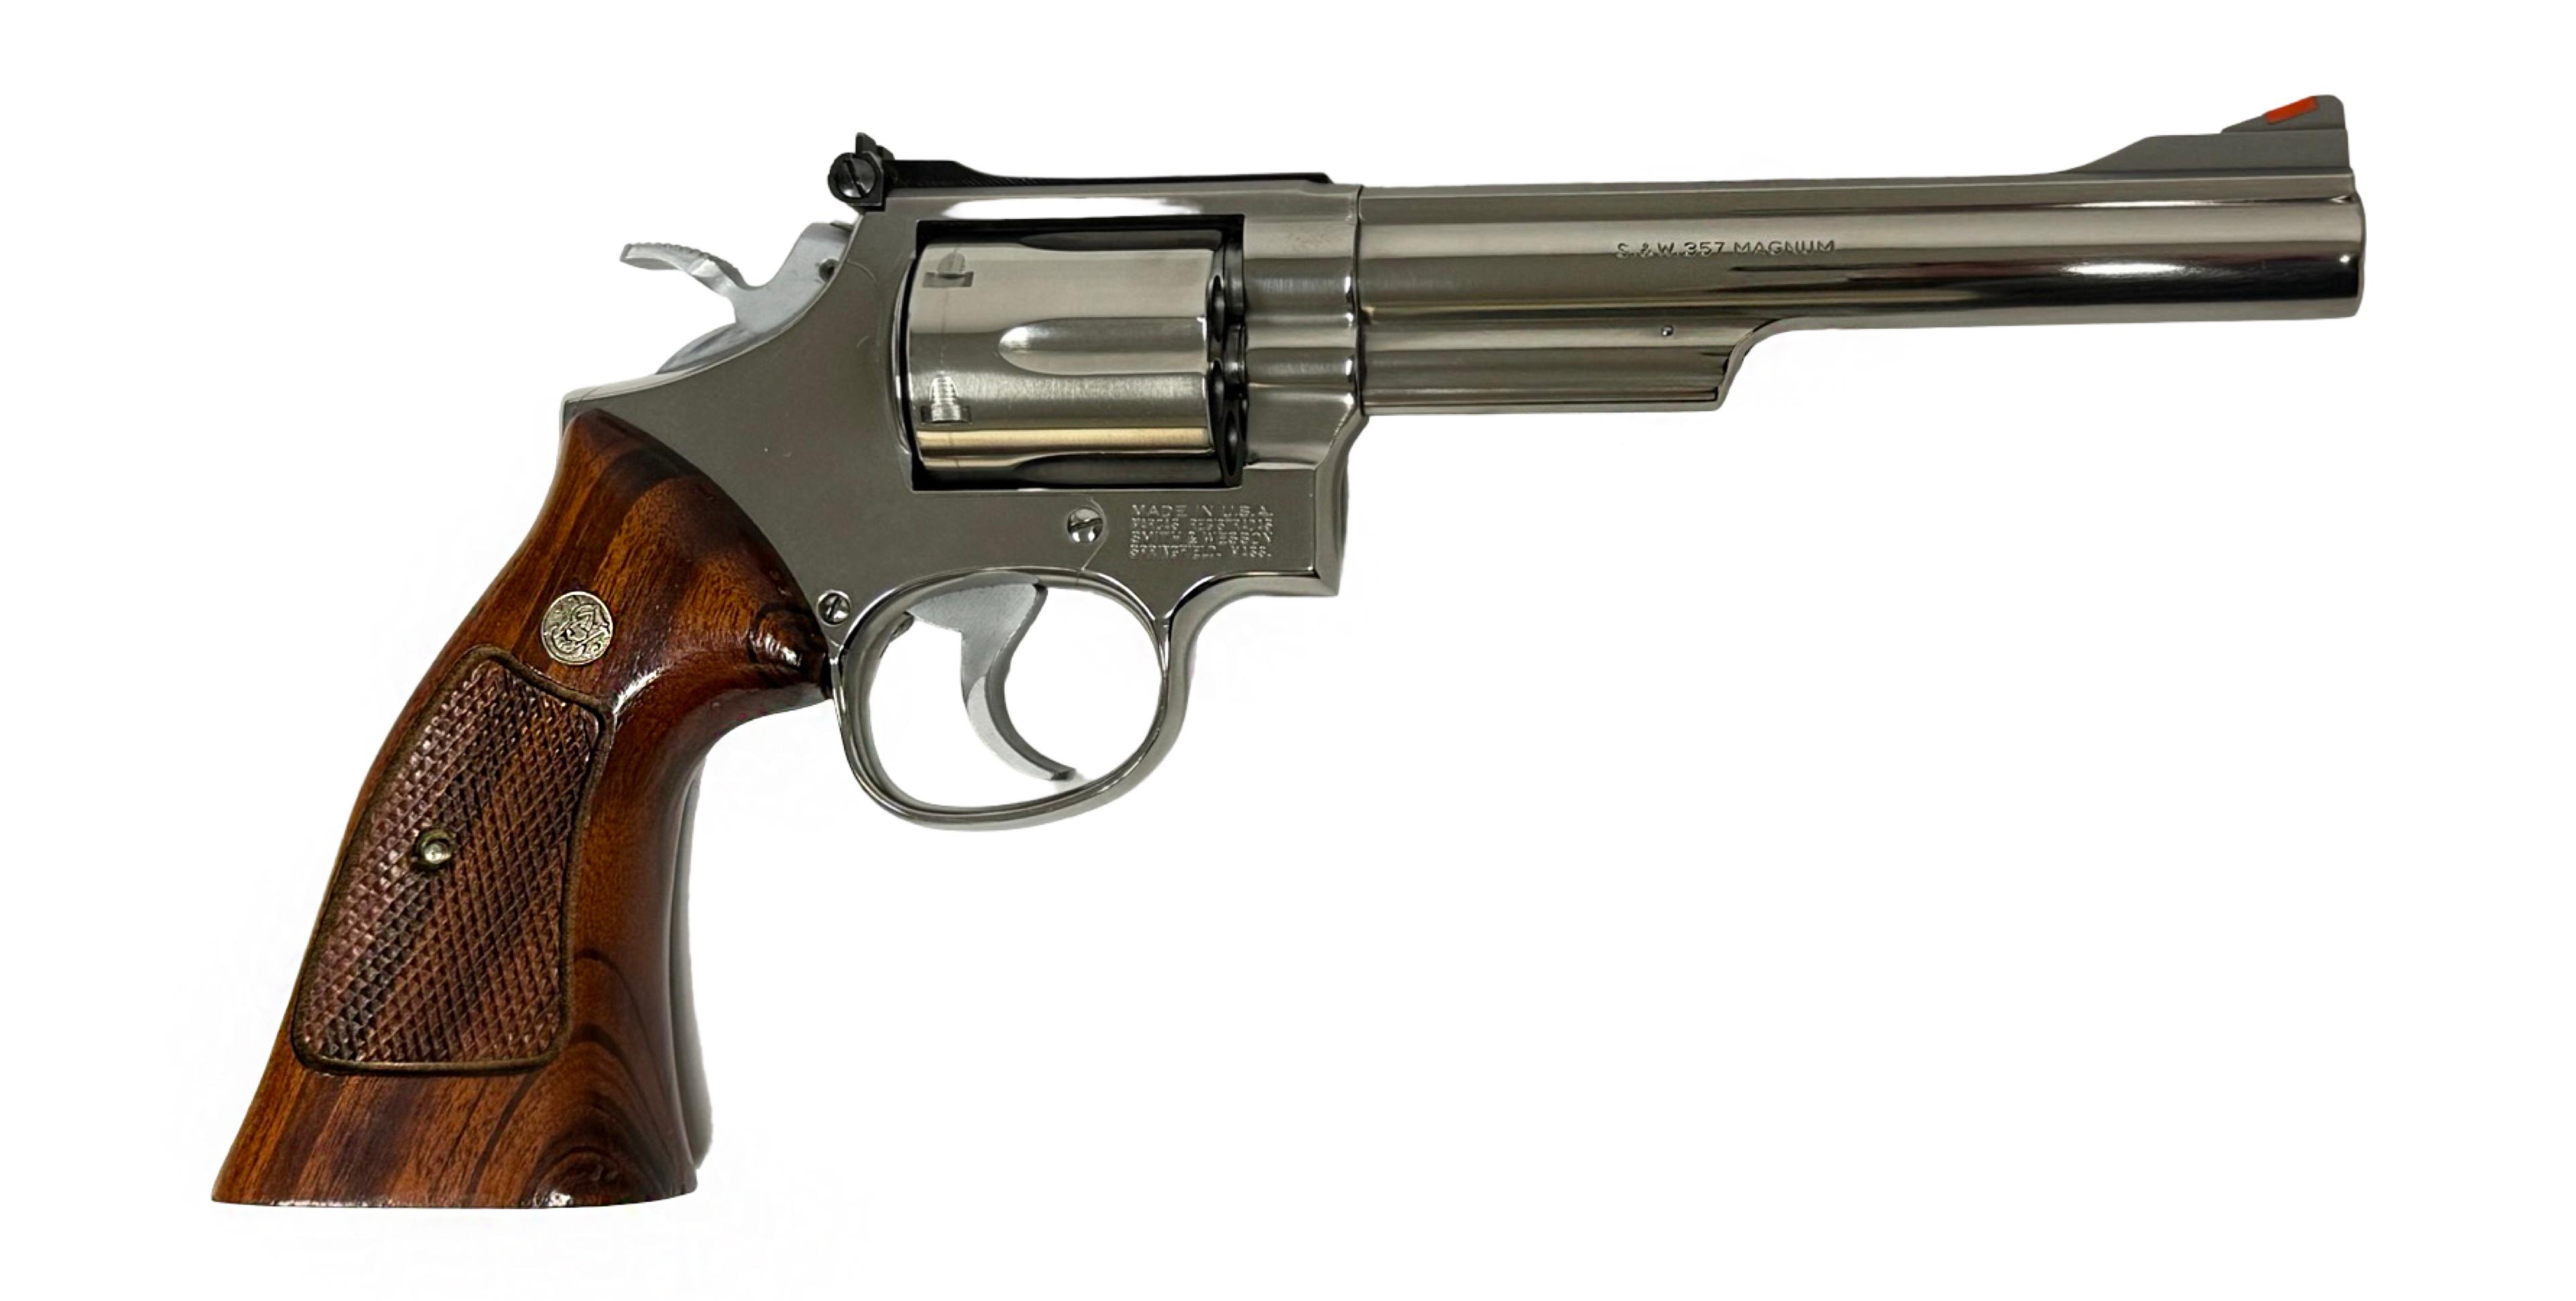 NIB Smith & Wesson Model 66-3 .357 MAG. Stainless Steel 6" 3T Revolver